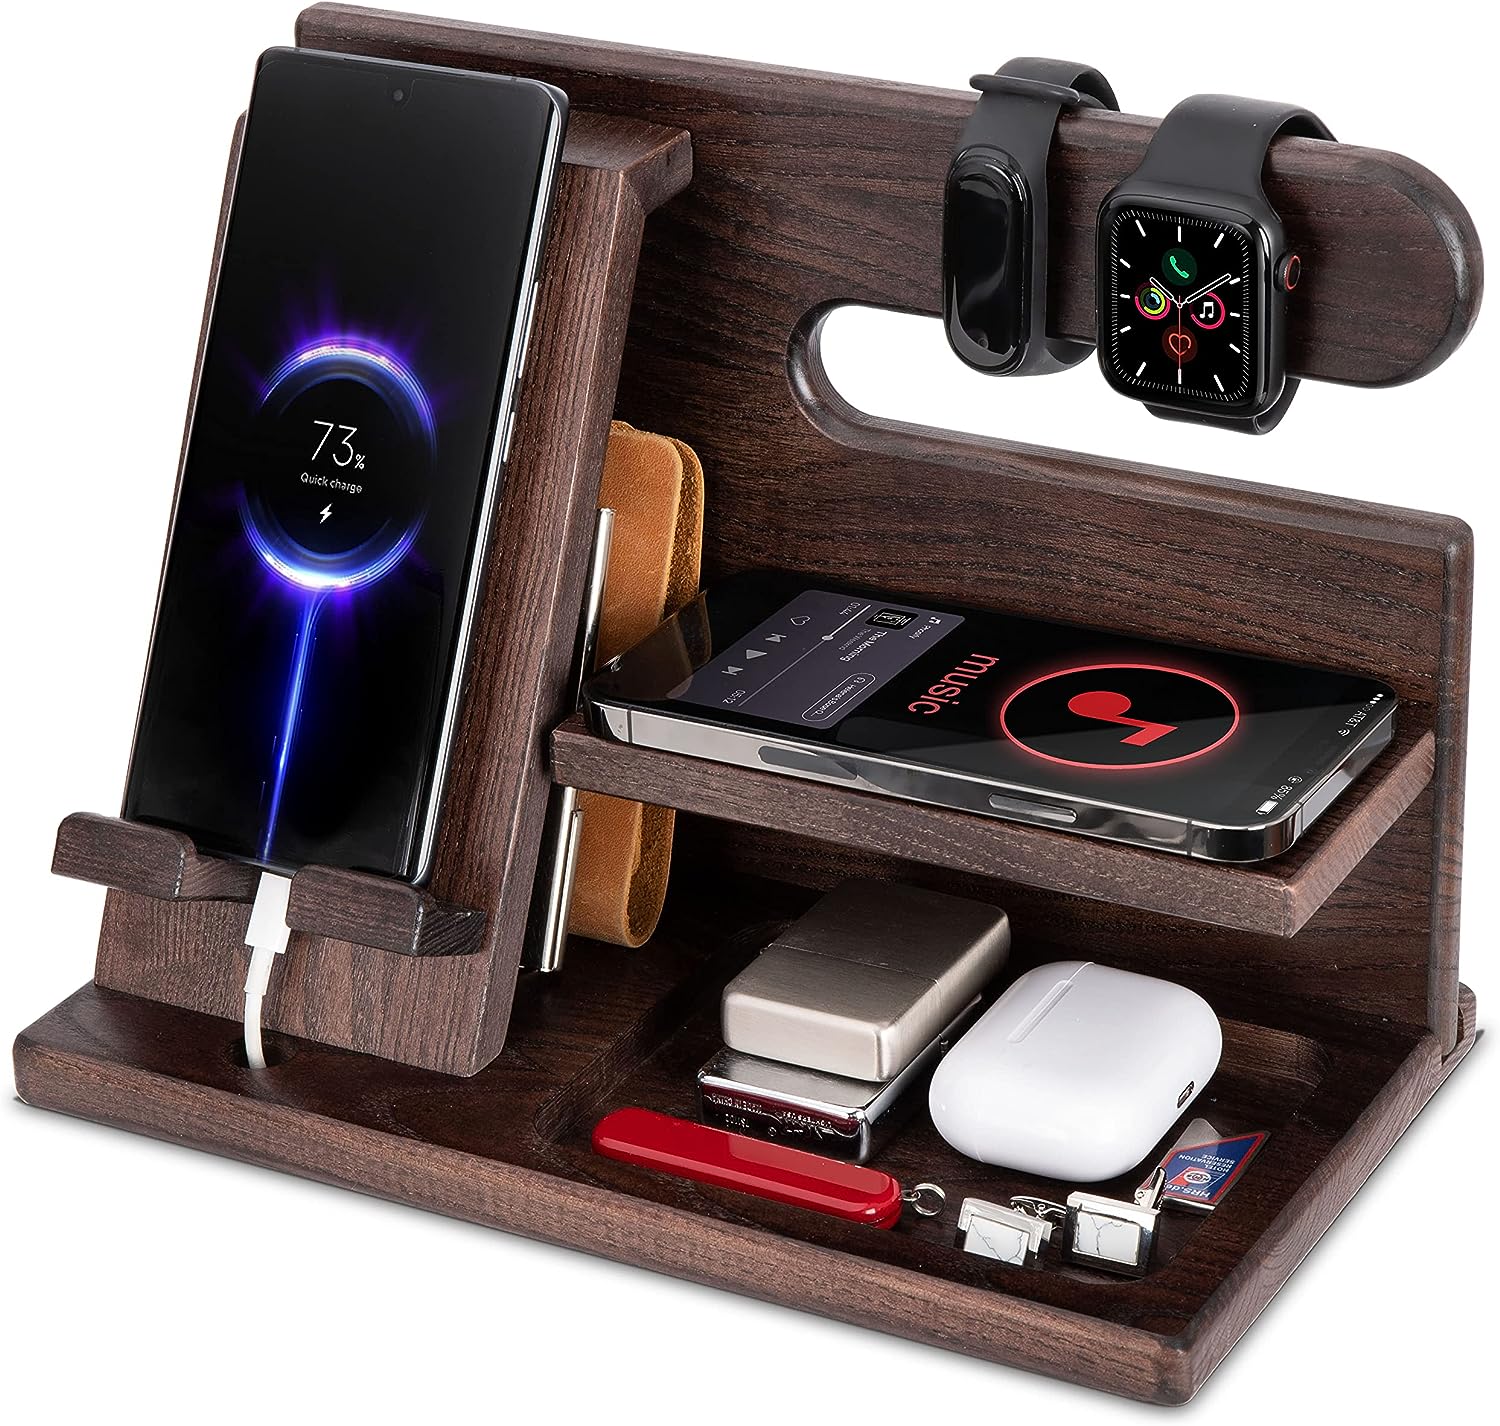  MyFancyCraft,Gifts for Men Wood Phone Docking Station Ash Key Holder Gift for Him Cell Phone Stand Organizer Dad Birthday Husband Anniversary Nightstand